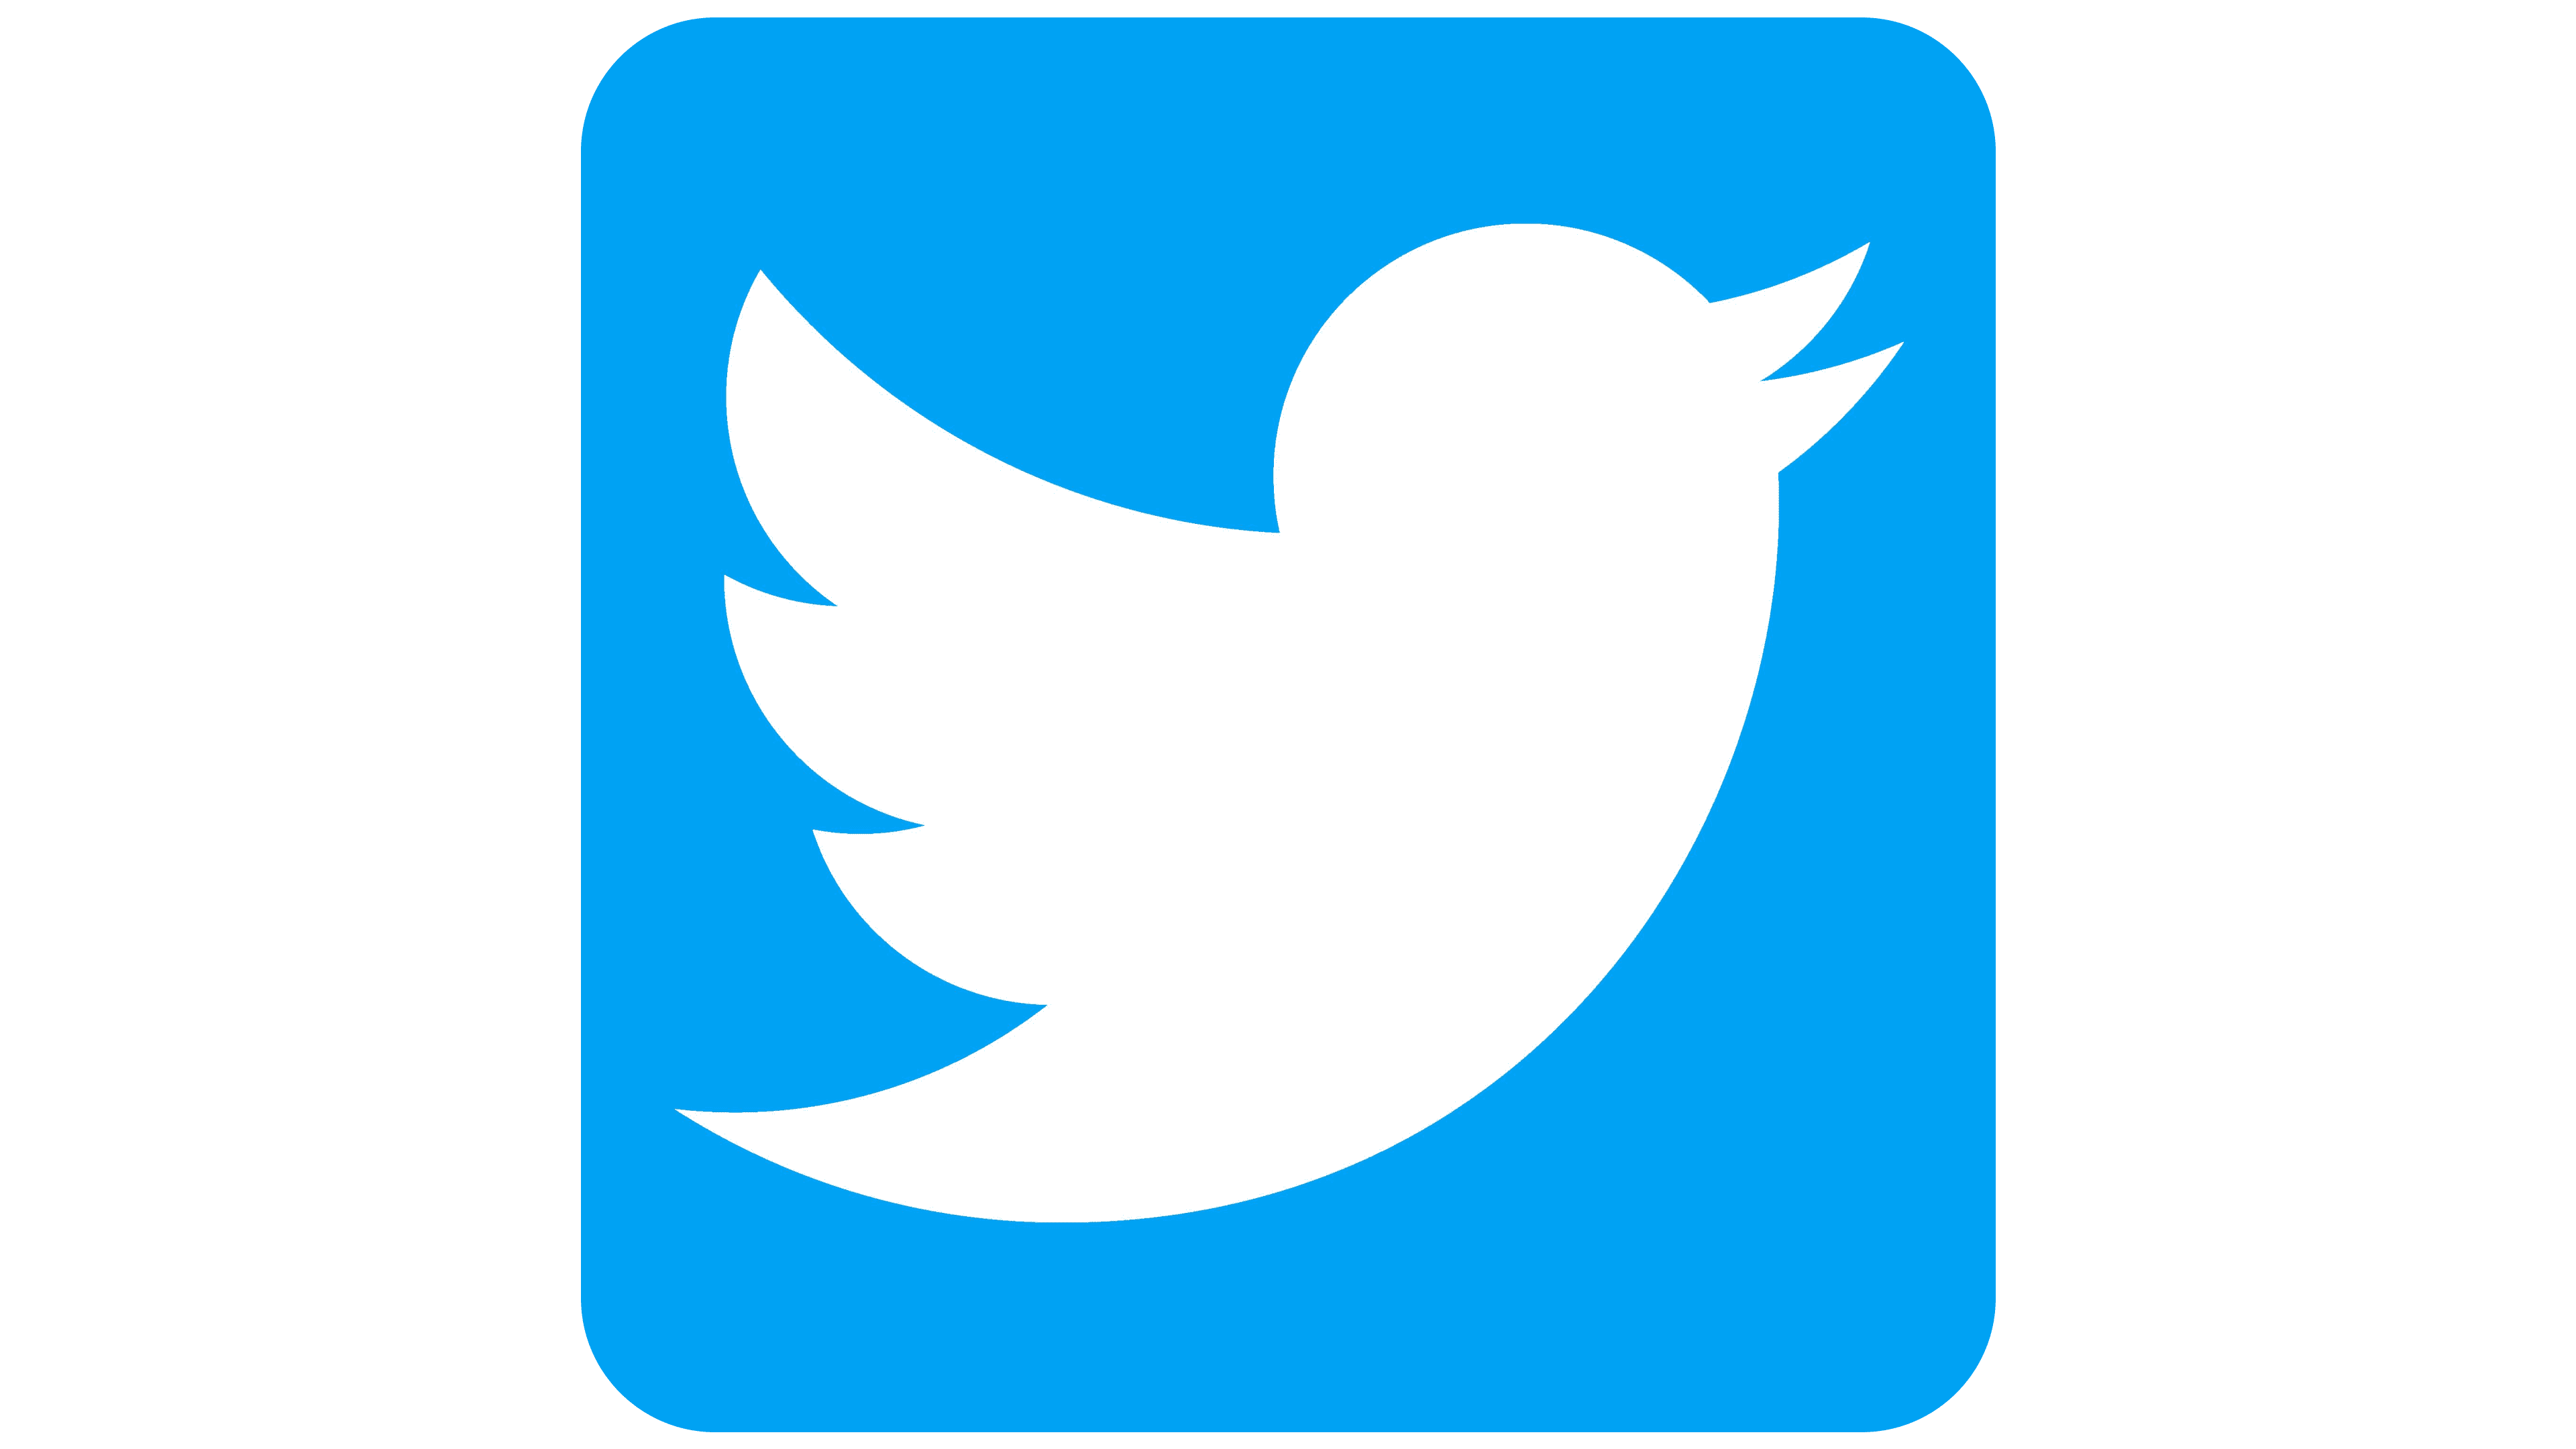 an image of the Twitter logo